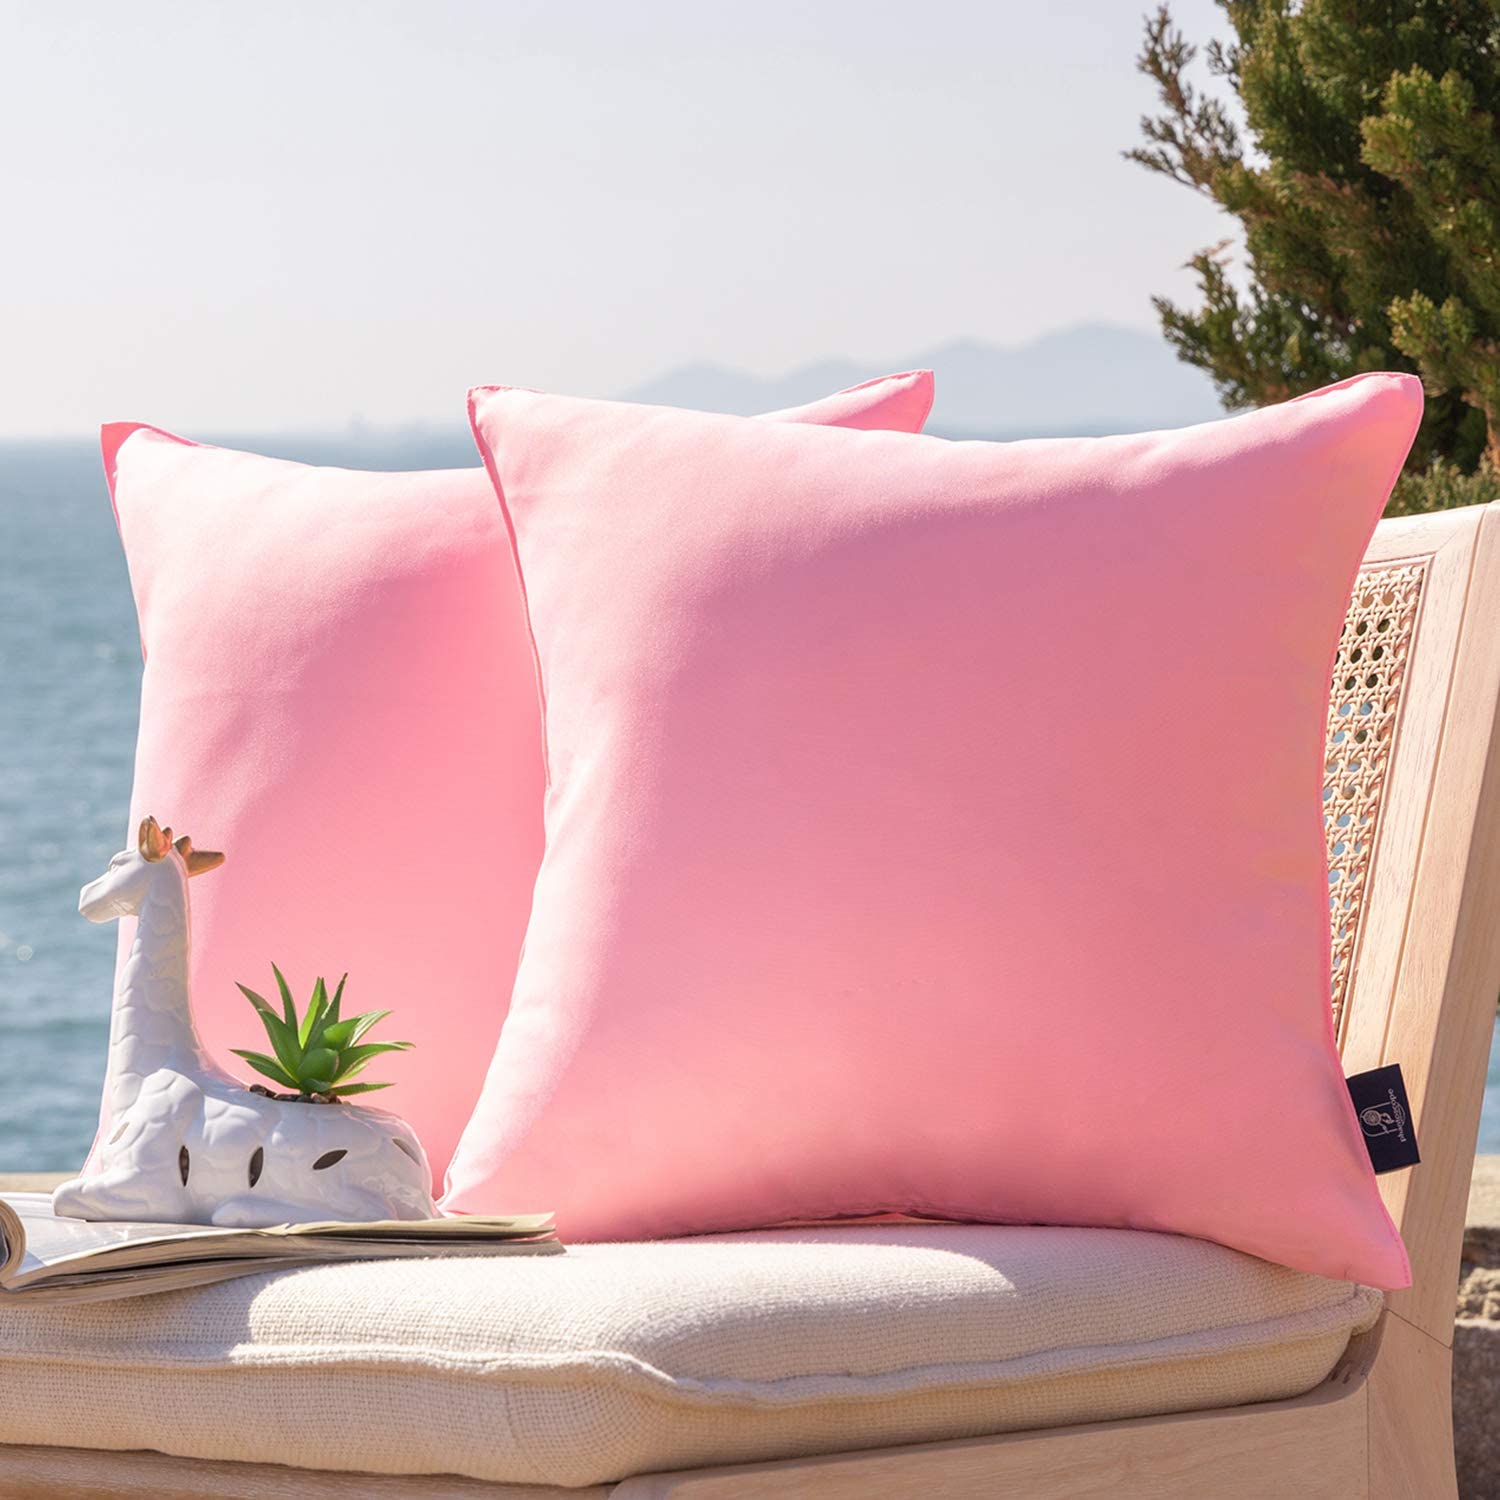 Phantoscope Pack of 2 Outdoor Waterproof Throw Pillow Covers Decorative ...